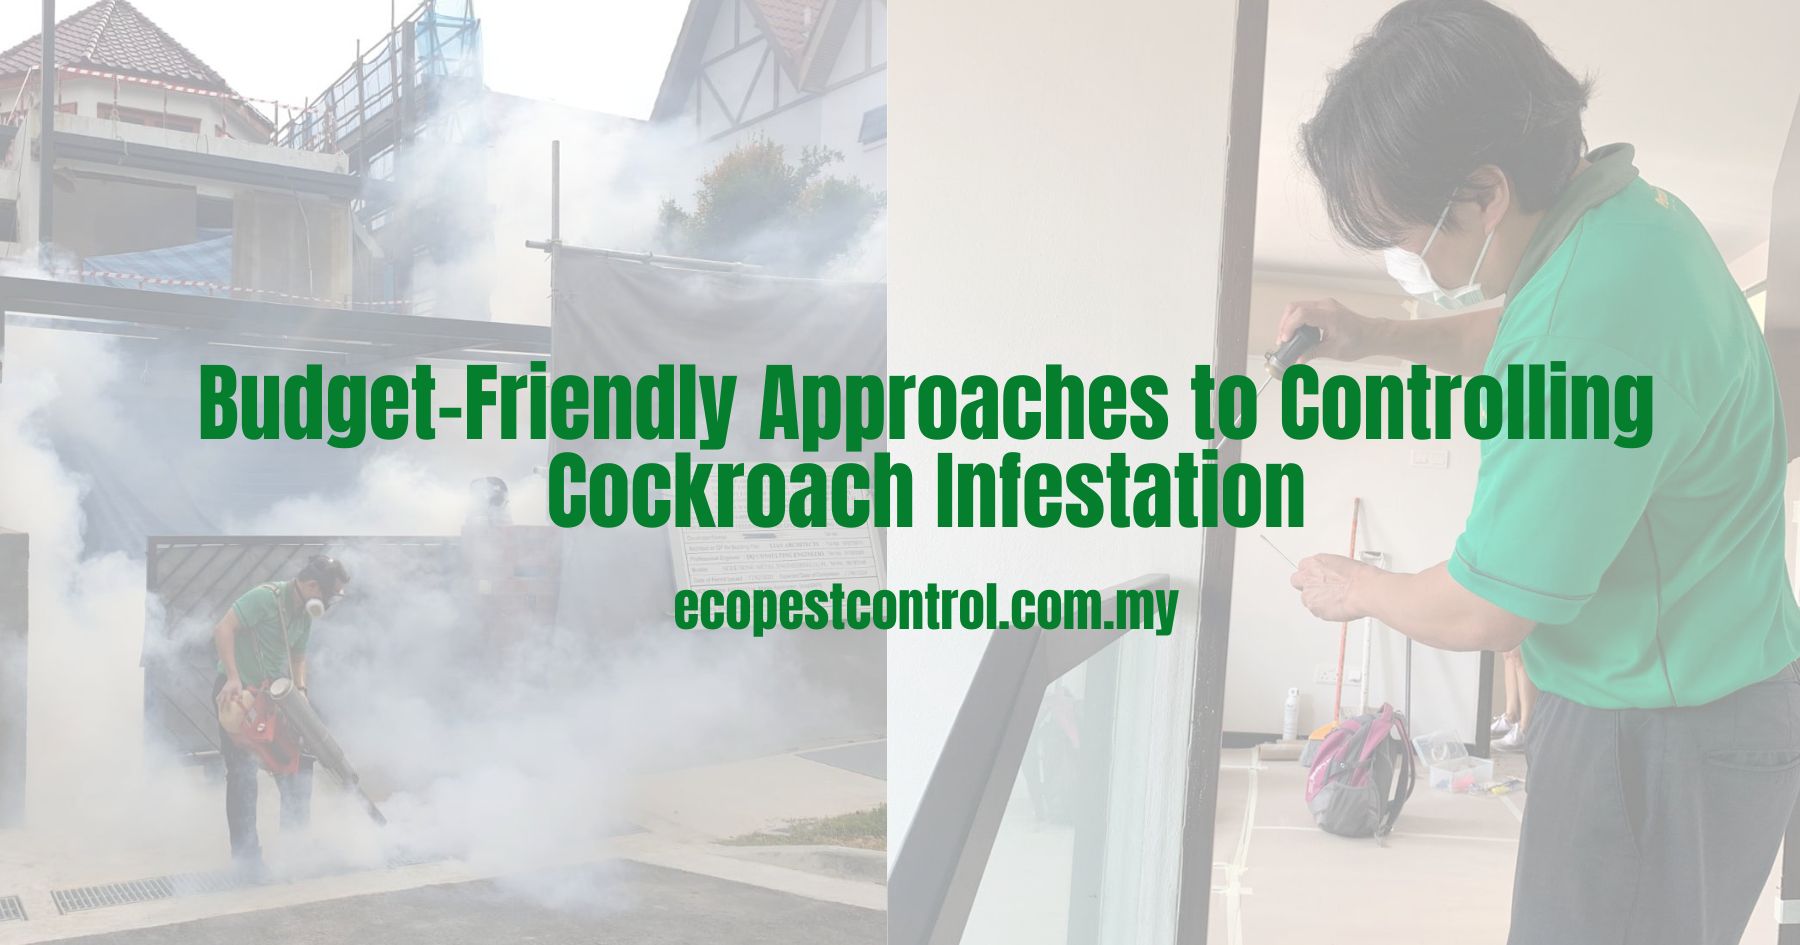 Budget-Friendly Approaches to Controlling Cockroach Infestation